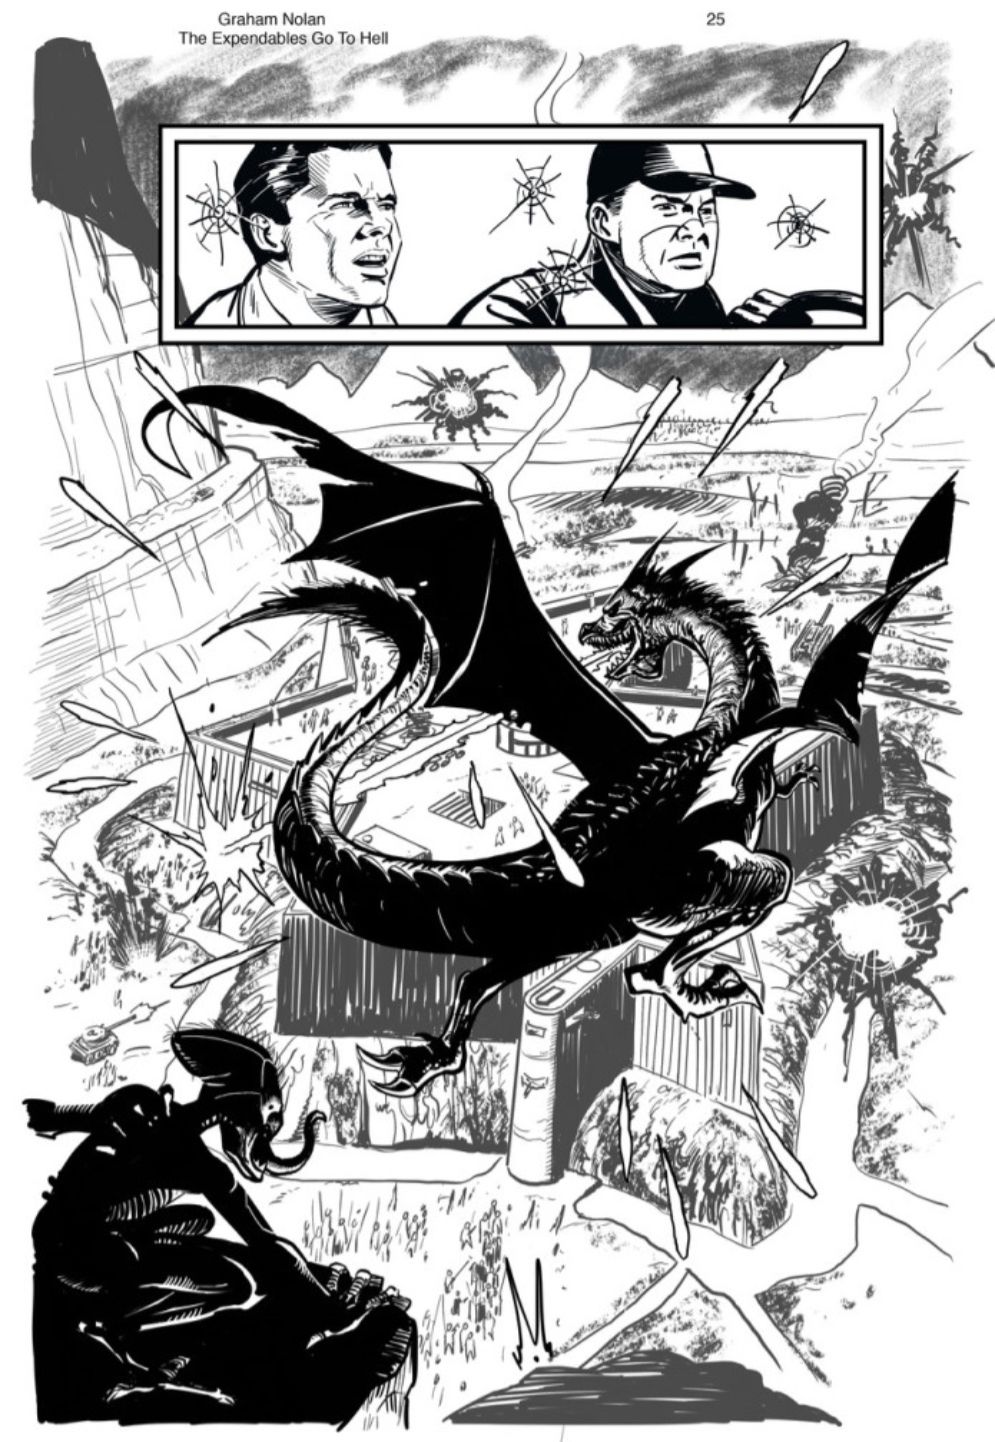 The Expendables Go To Hell Graphic Novel Page 25